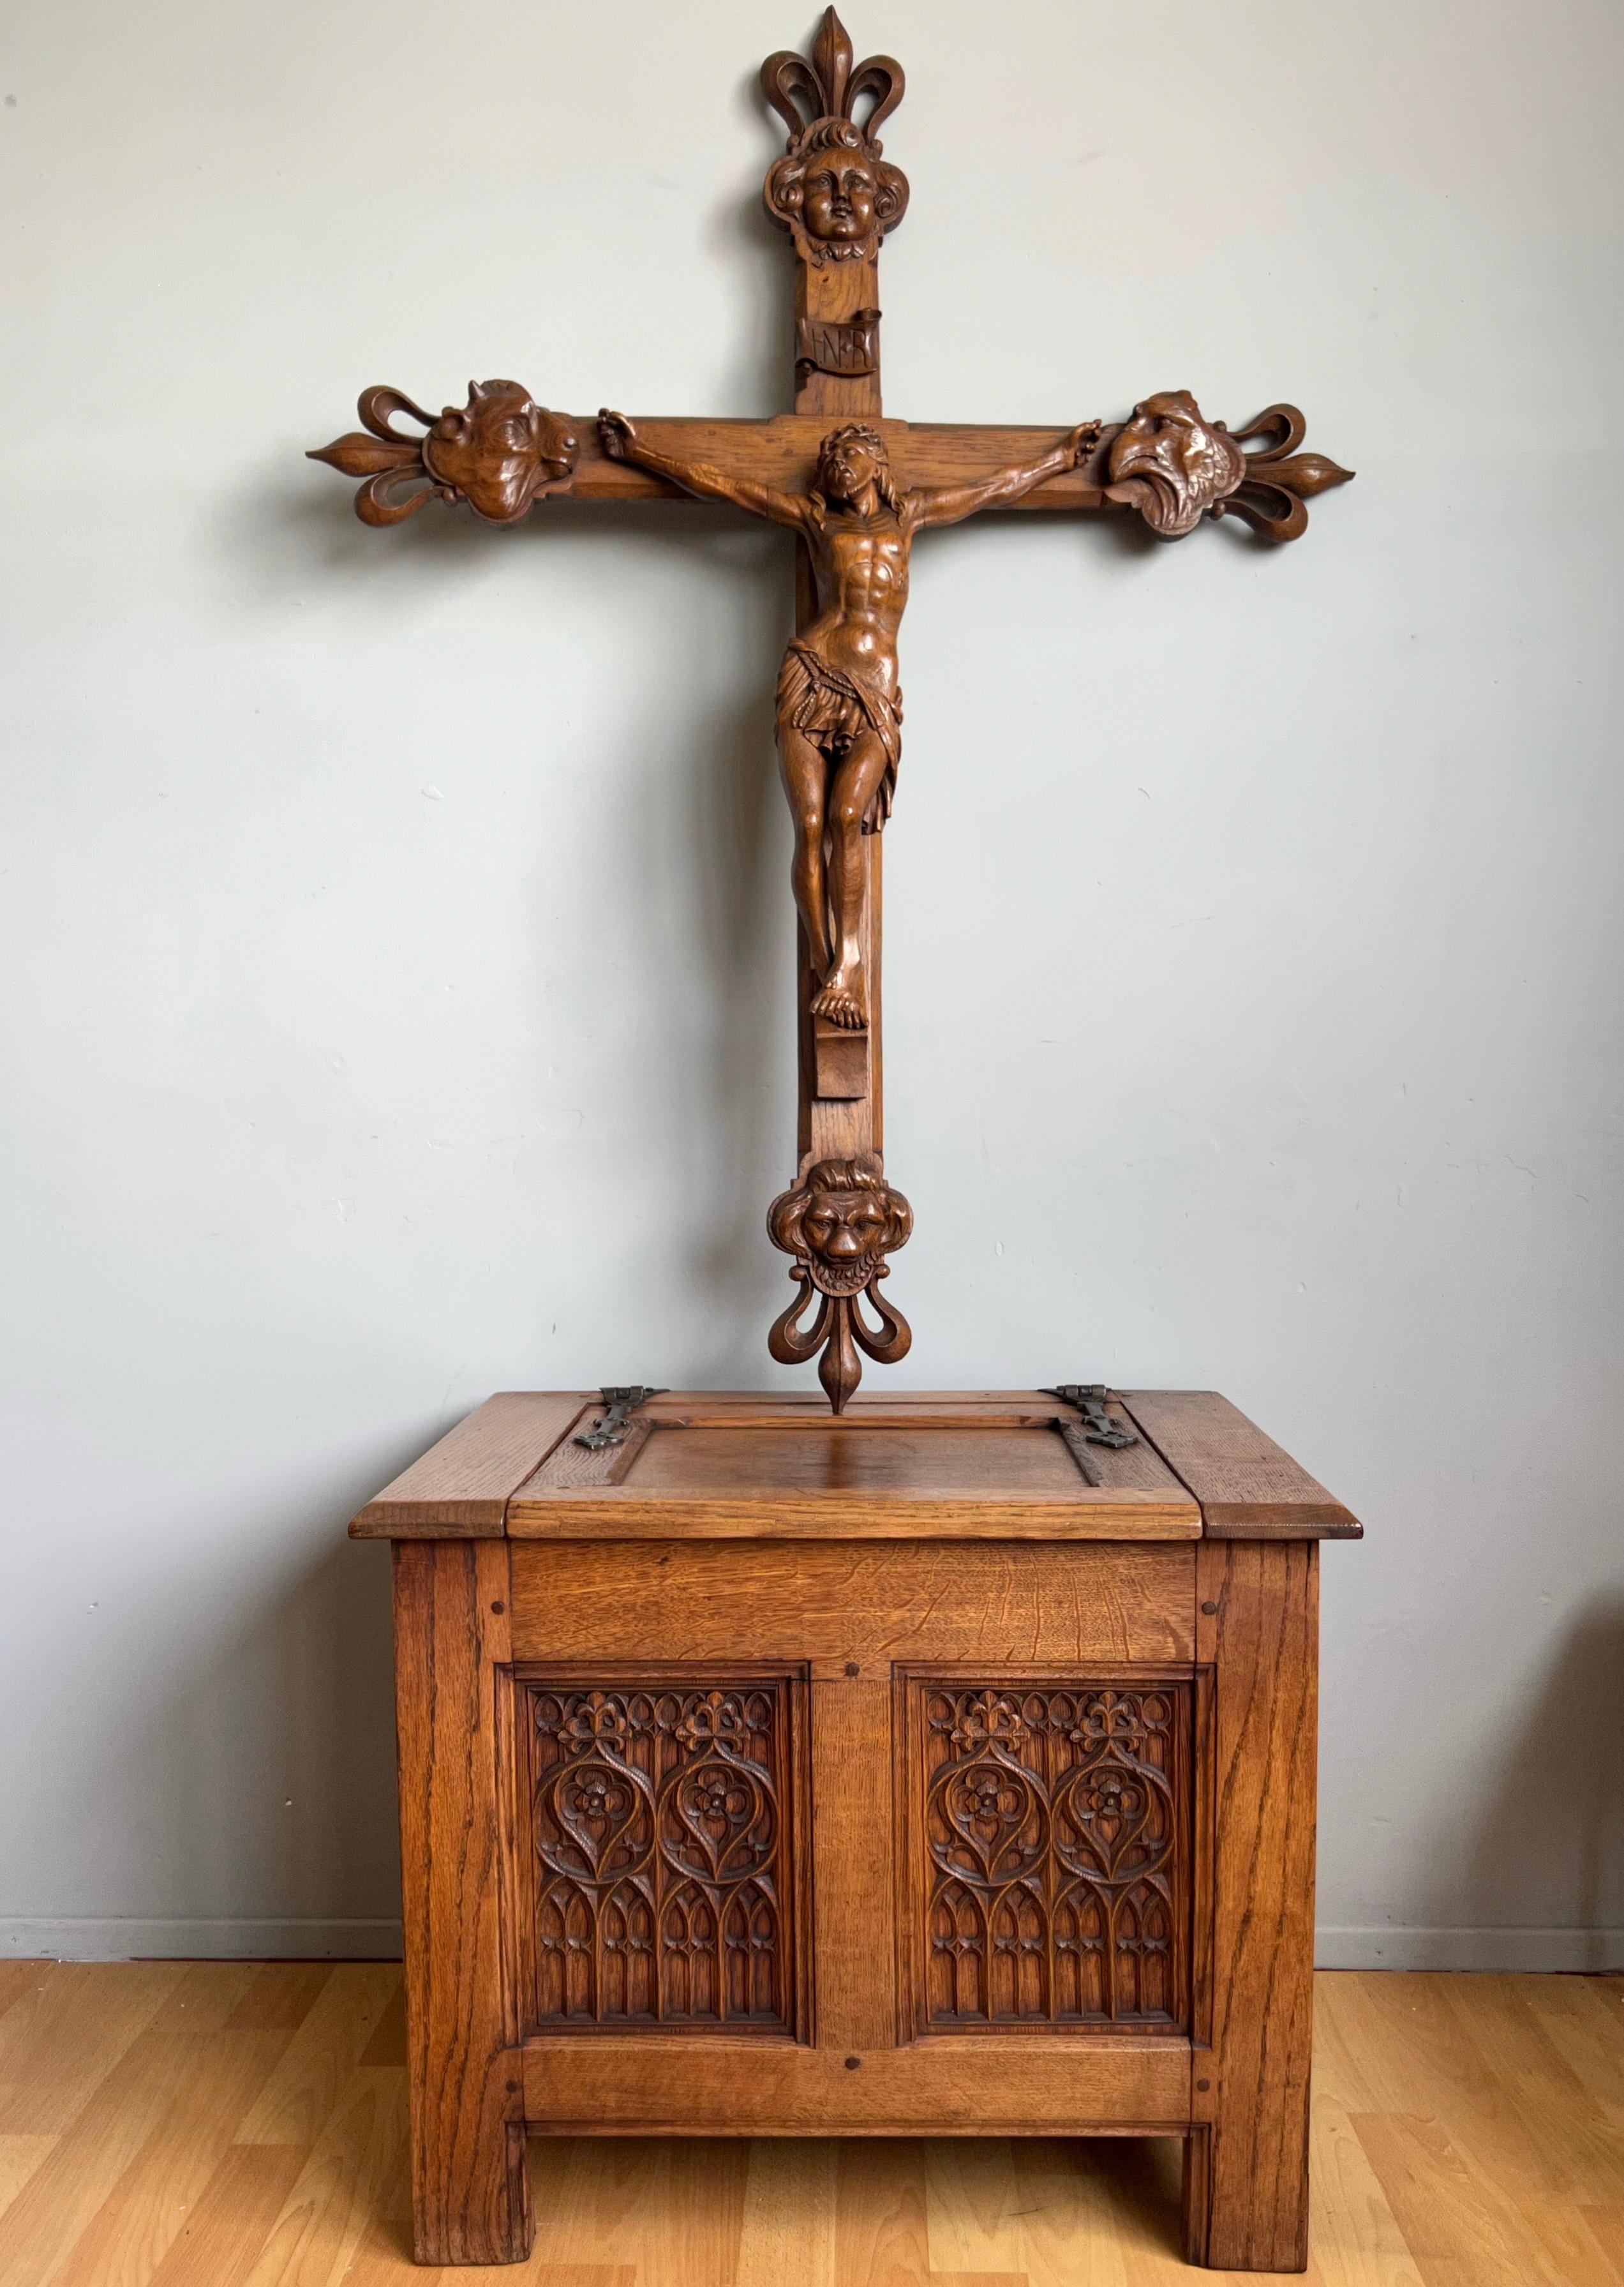 Antique large crucifix with stunning quality, hand carved details and an amazing patina.

This remarkable and large sculpture of a suffering Christ on the cross is different to almost all others. The artist who hand-sculpted this impressive work of